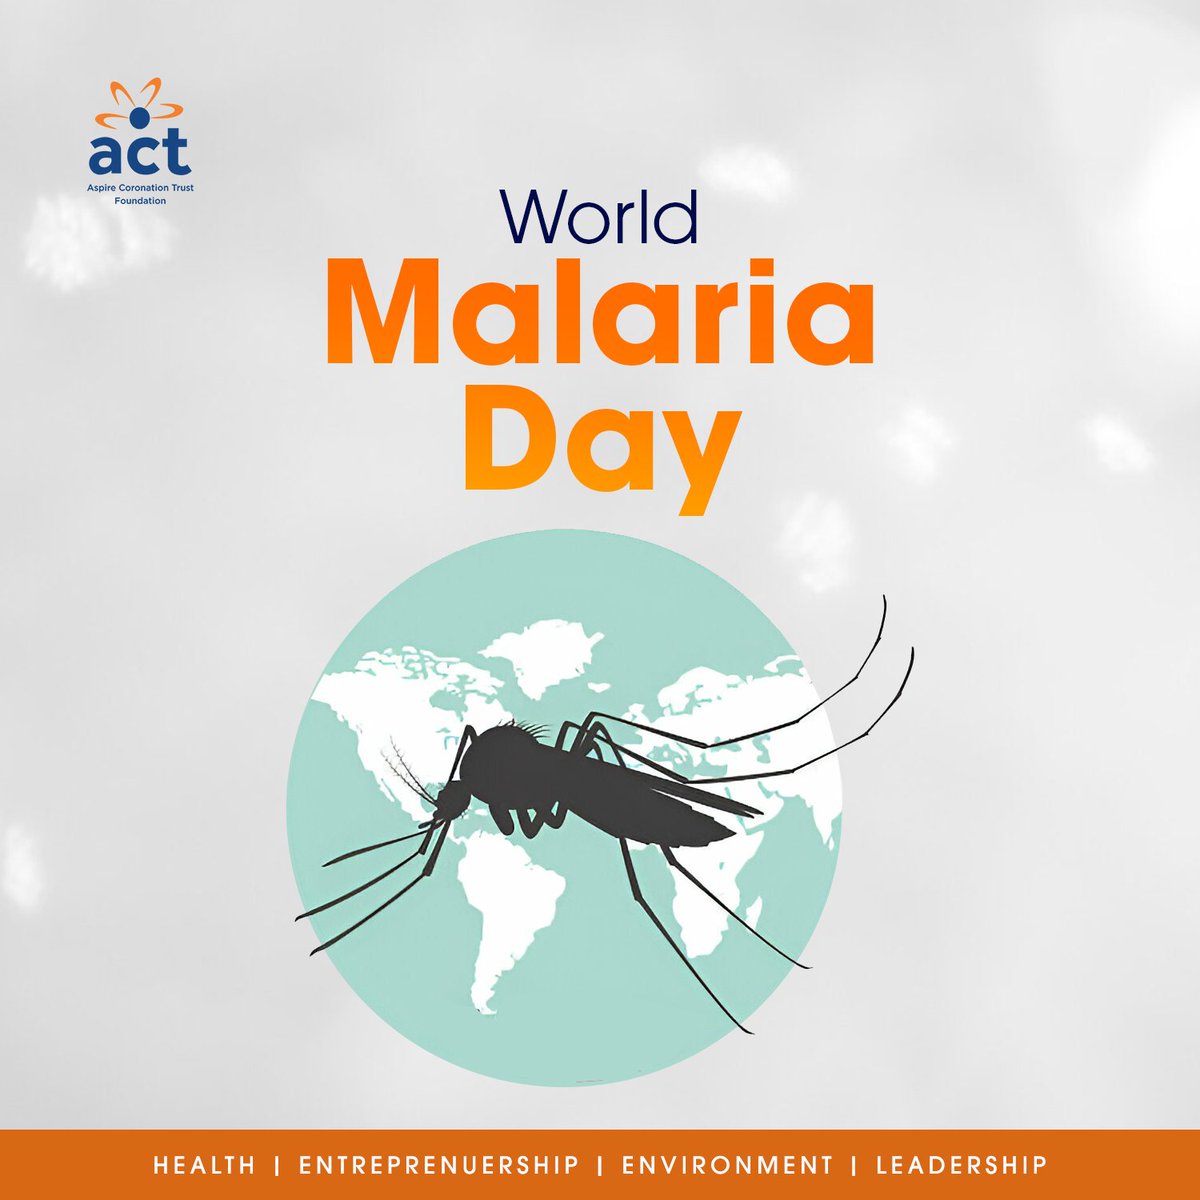 Today, we unite to accelerate the fight against malaria for a more equitable world on #WorldMalariaDay. 

Together, let's raise awareness, take action, and strive for a malaria-free future. 

 #ACTFoundation #HealthForAll #EndMalaria